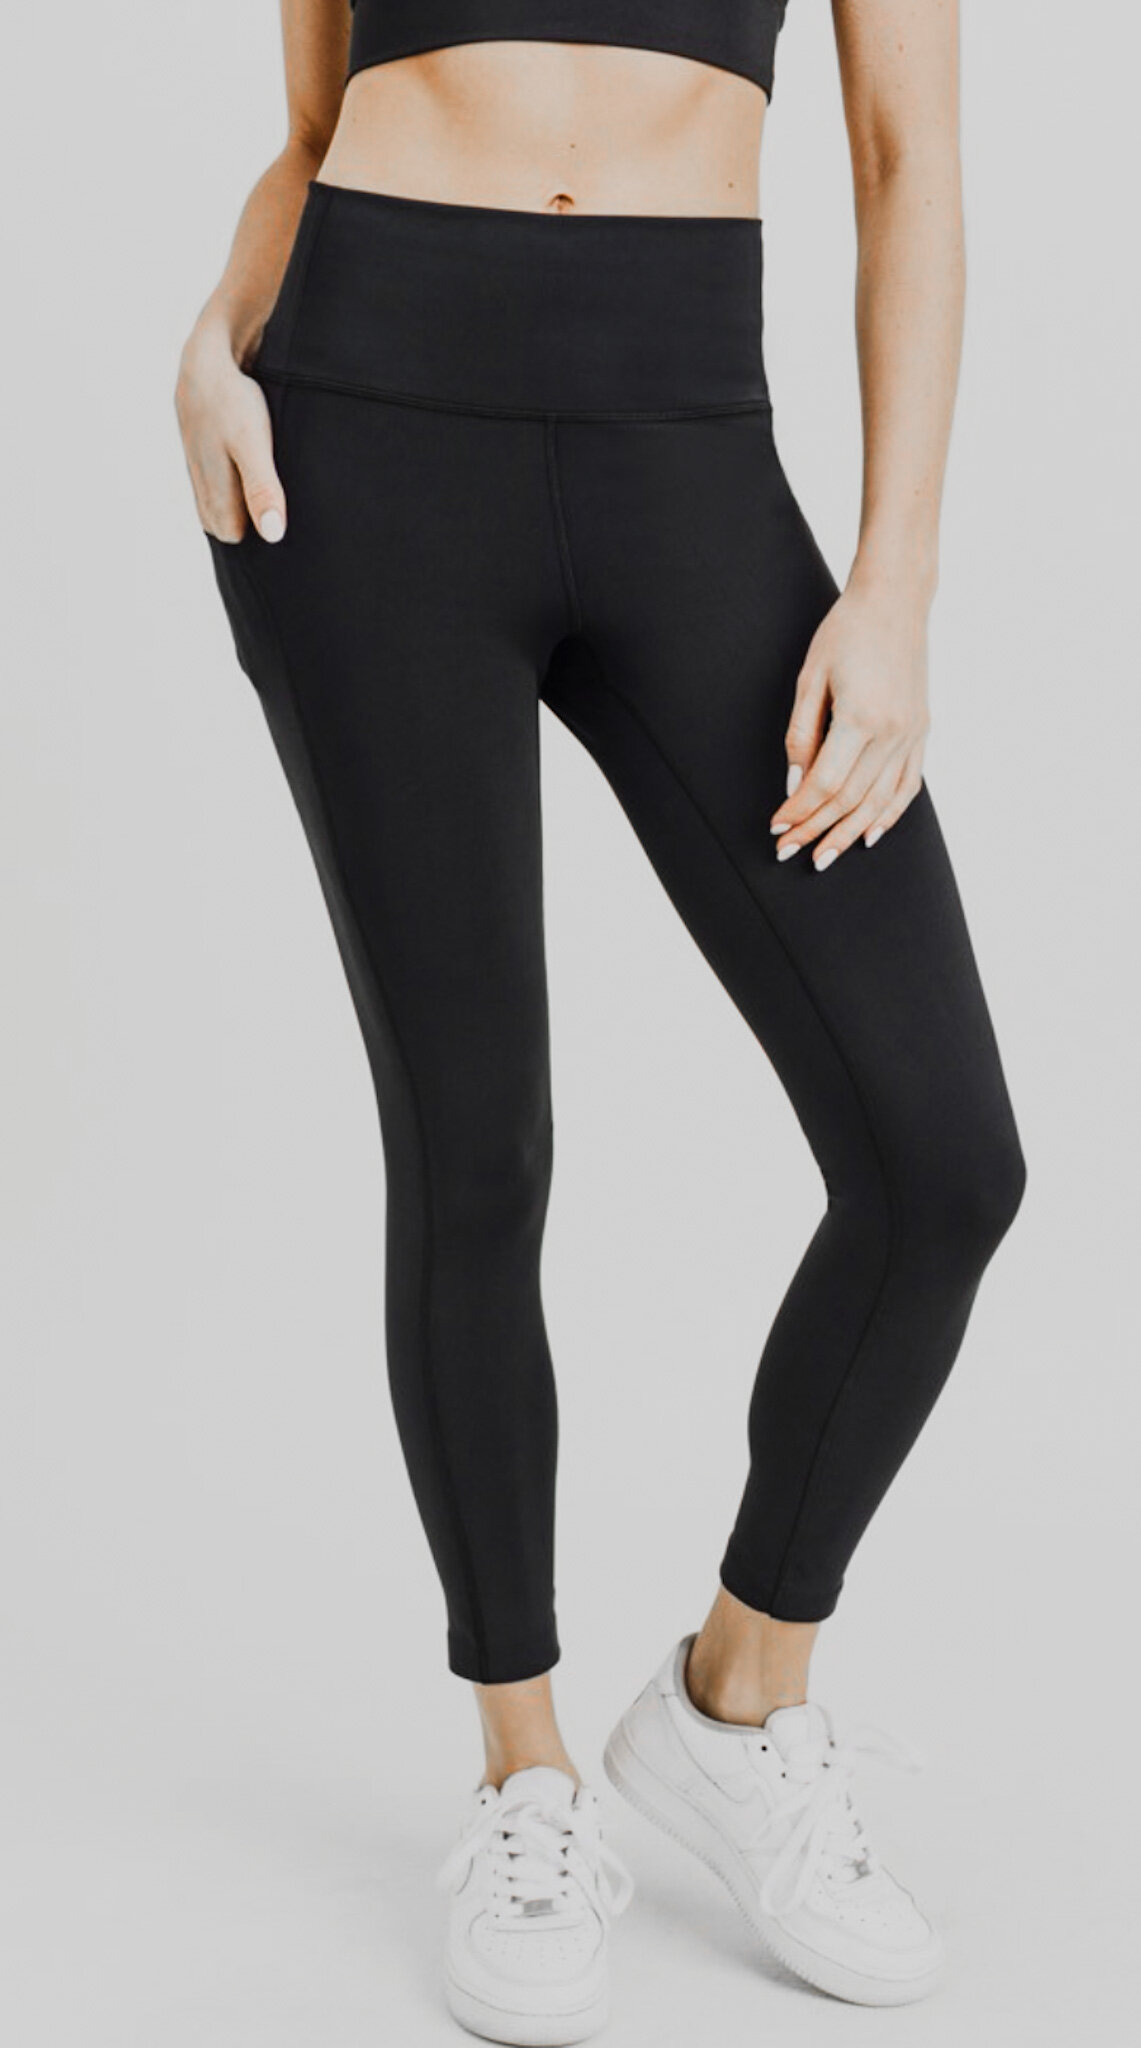 THE GO-TO LEGGING — ATHLEISURE COLLECTIVE